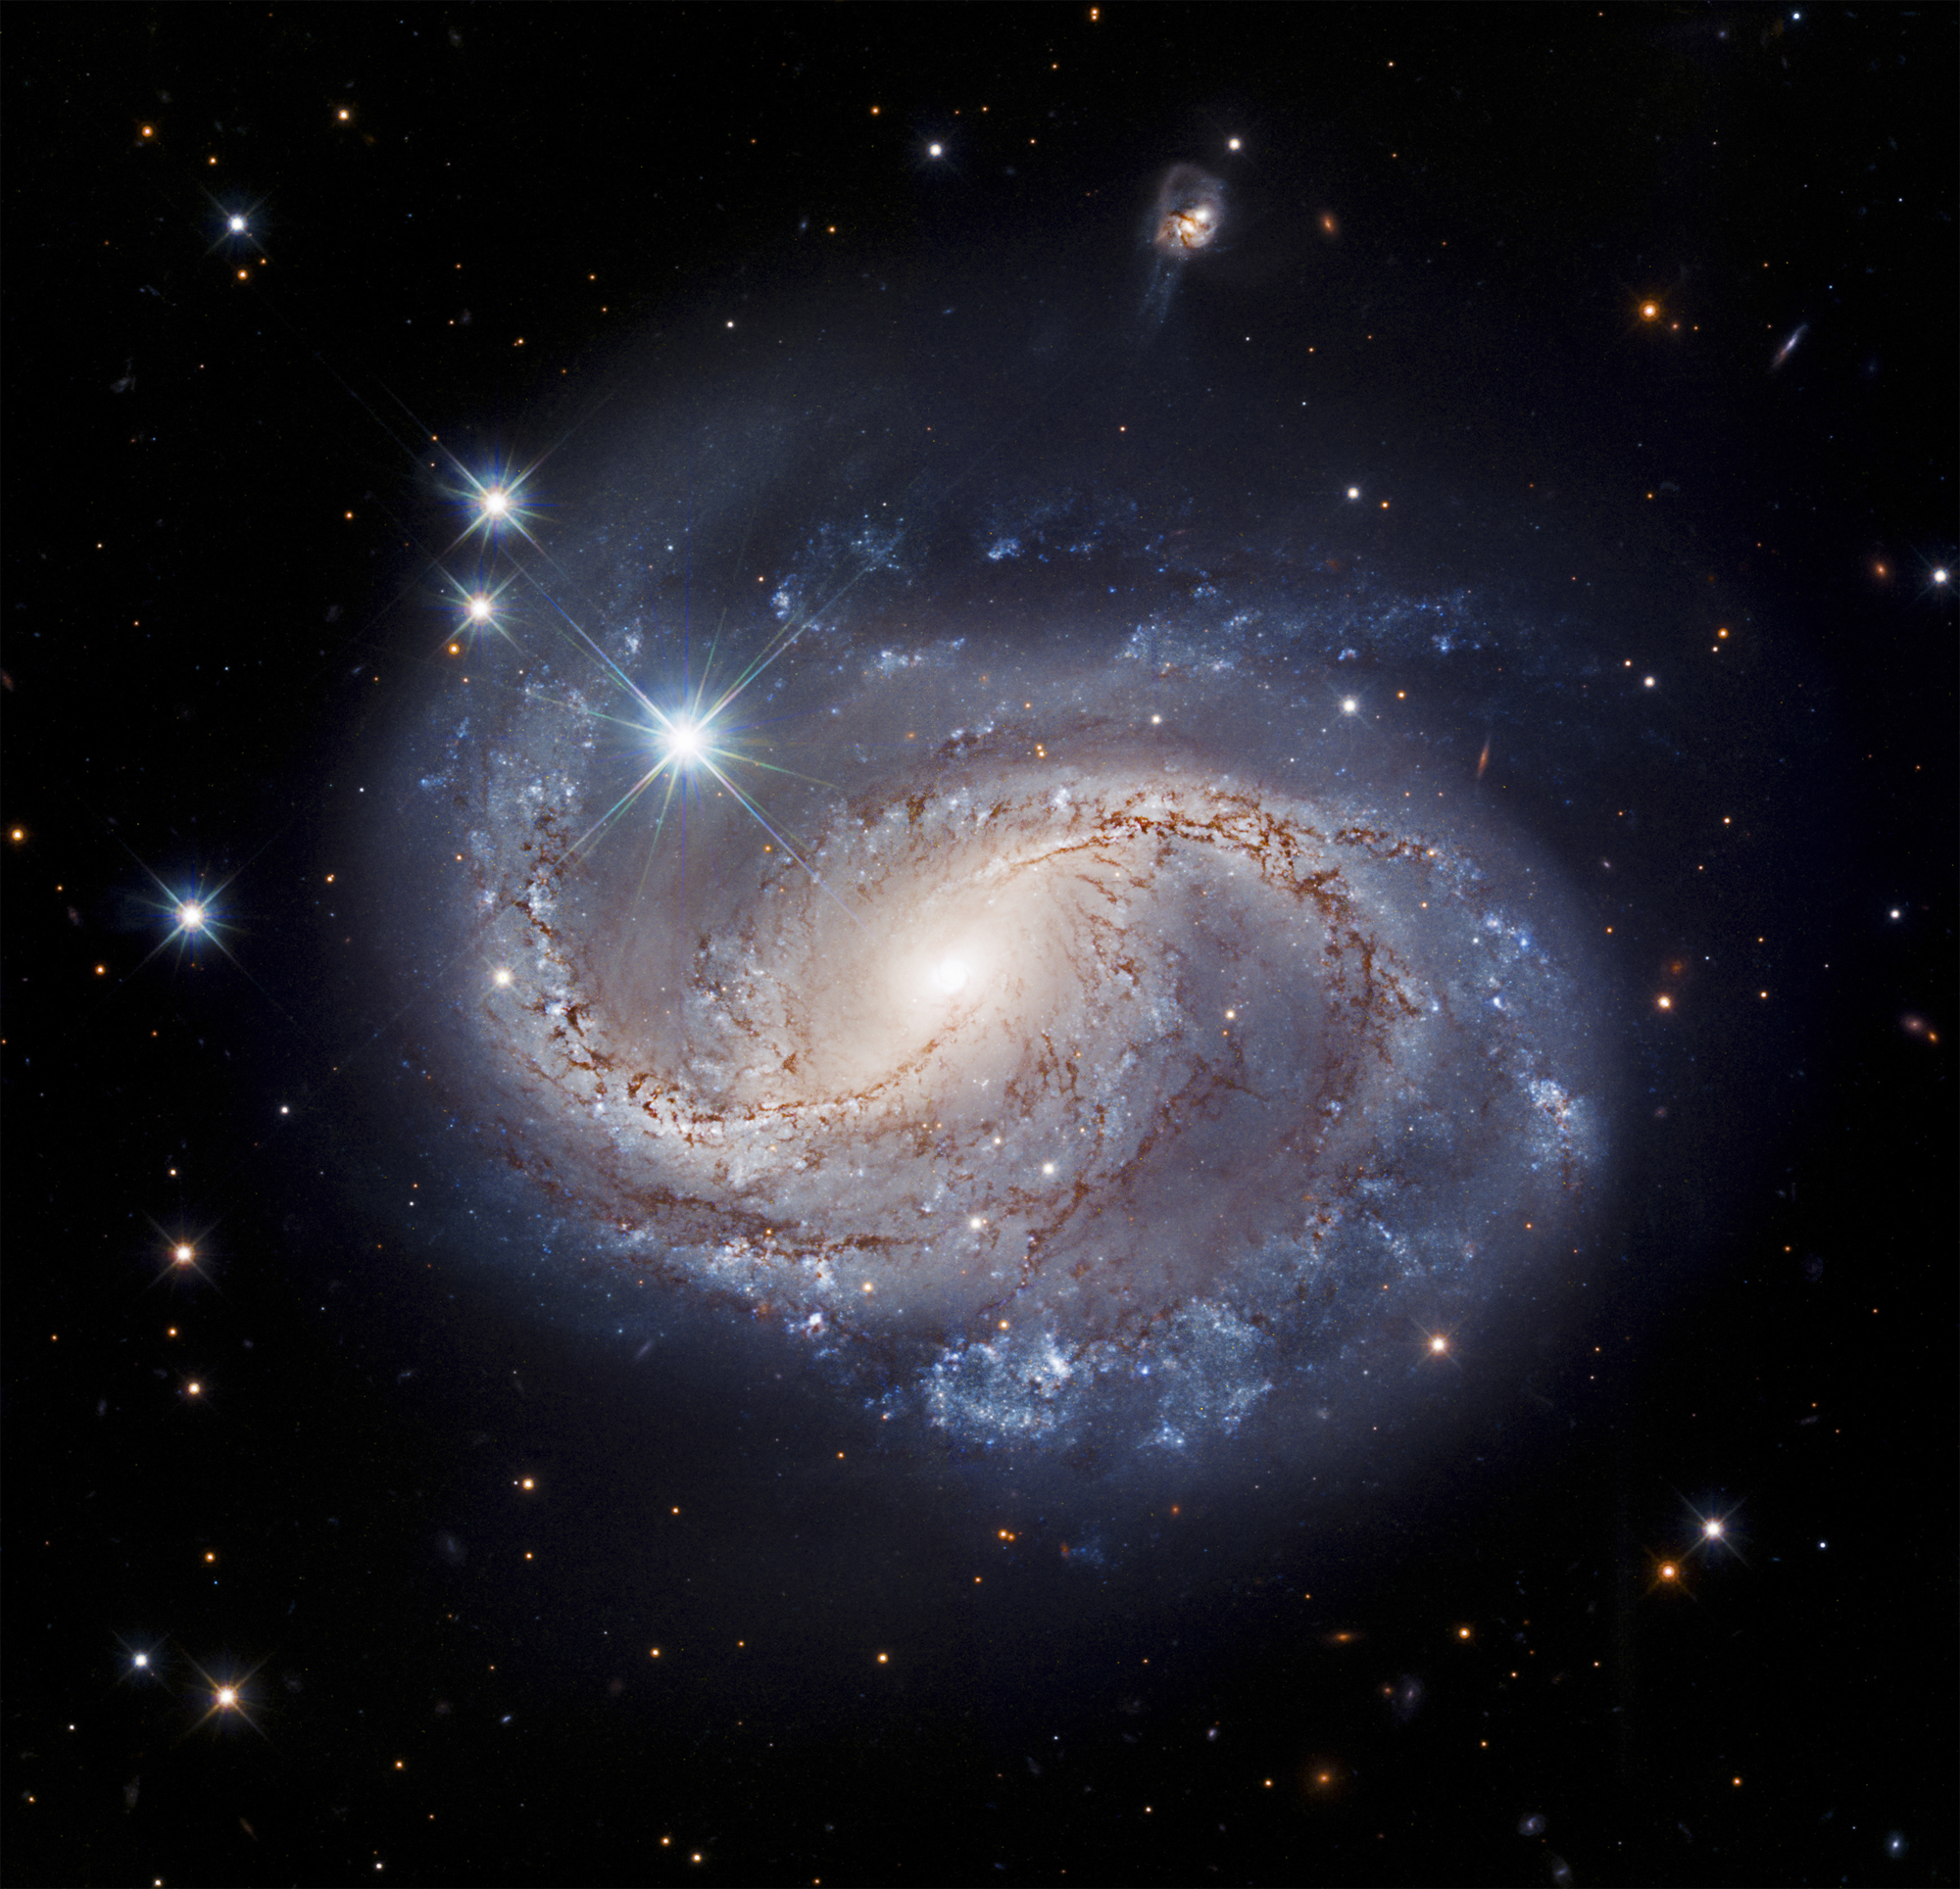 A Hubble Space Telescope photo of spiral galaxy NGC 6956.